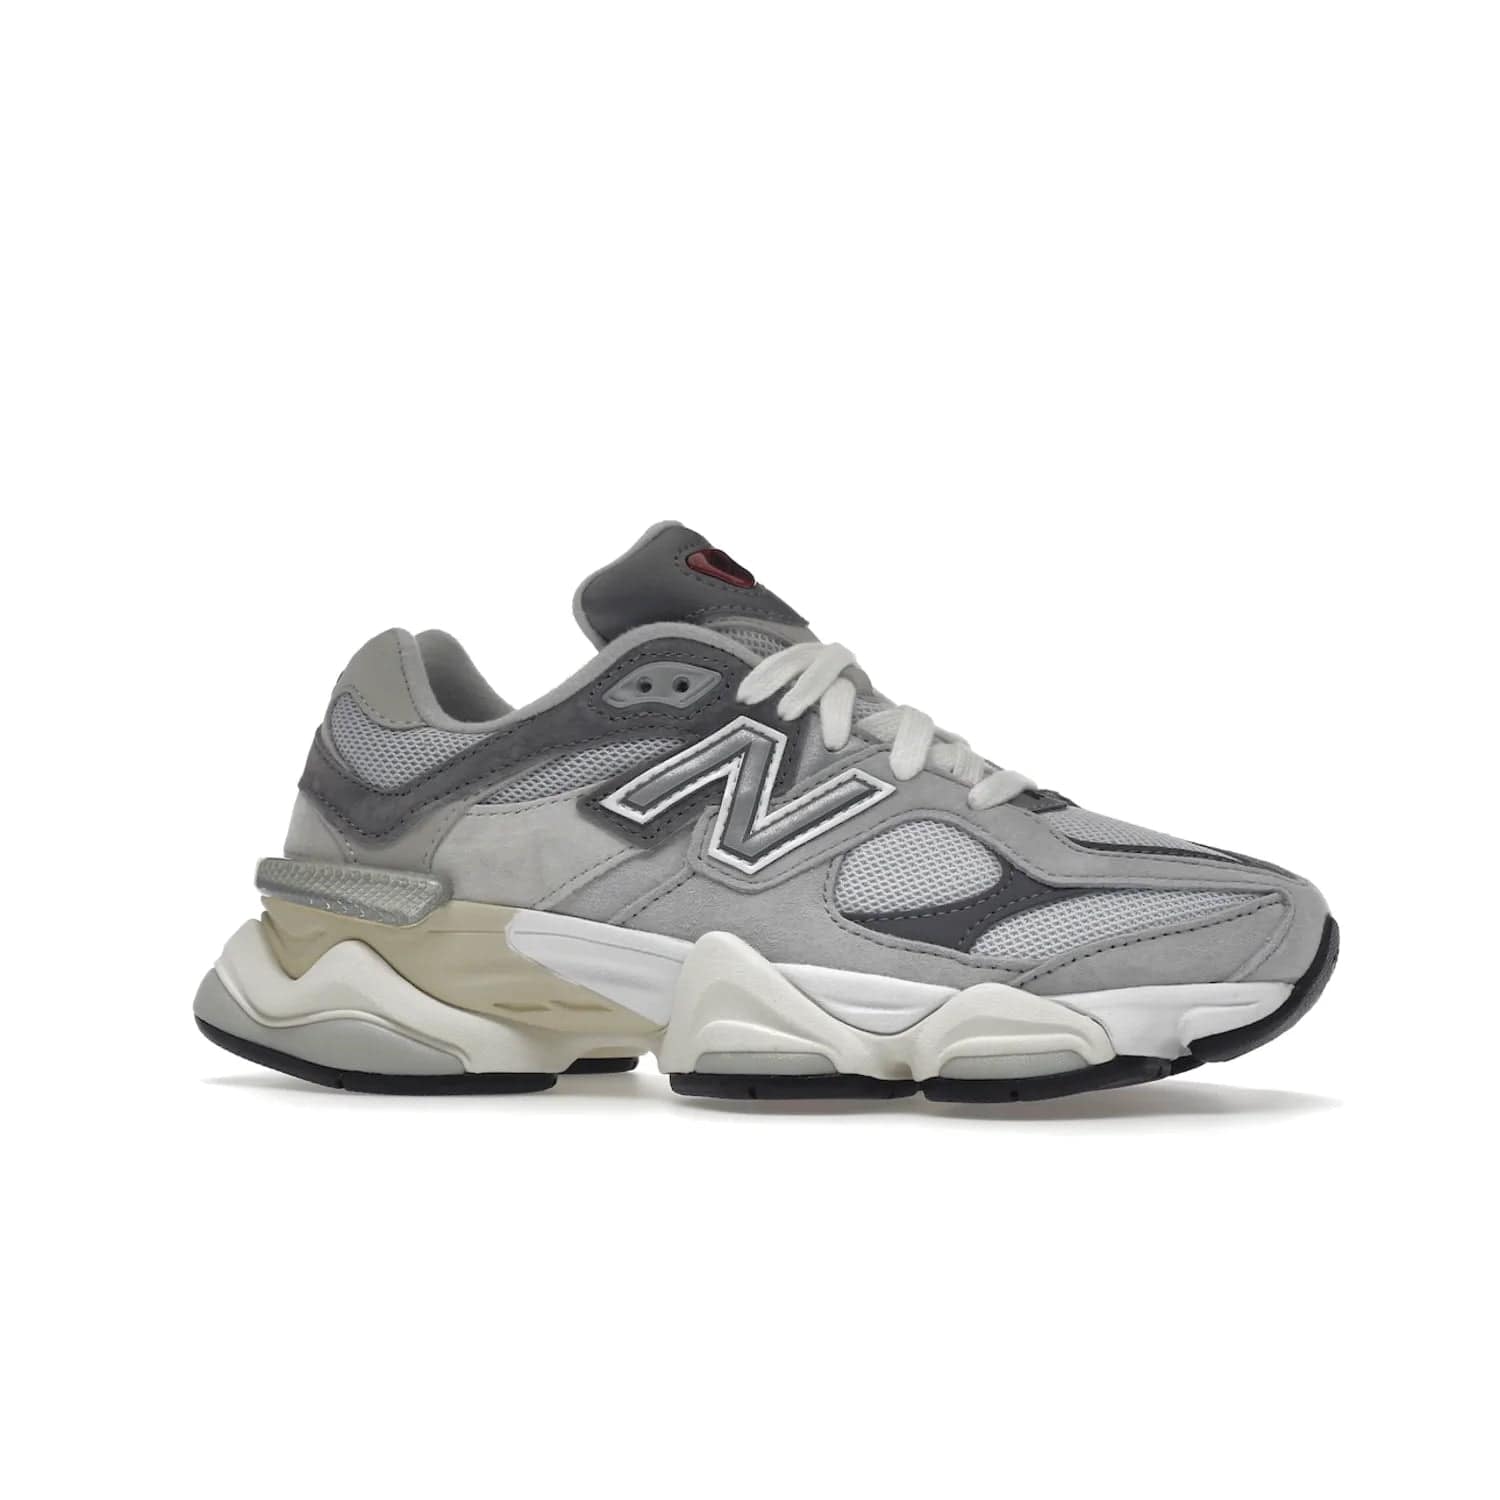 New Balance 9060 Rain Cloud Grey - Image 3 - Only at www.BallersClubKickz.com - New Balance 9060 Rain Cloud Grey is an early 2000s design with grey and off-white tones. Pigskin suede, mesh, and silver accents. "N" emblem and dual-density midsole on diamond outsole. ABZORB technology cushioning. September 2nd release for $150.